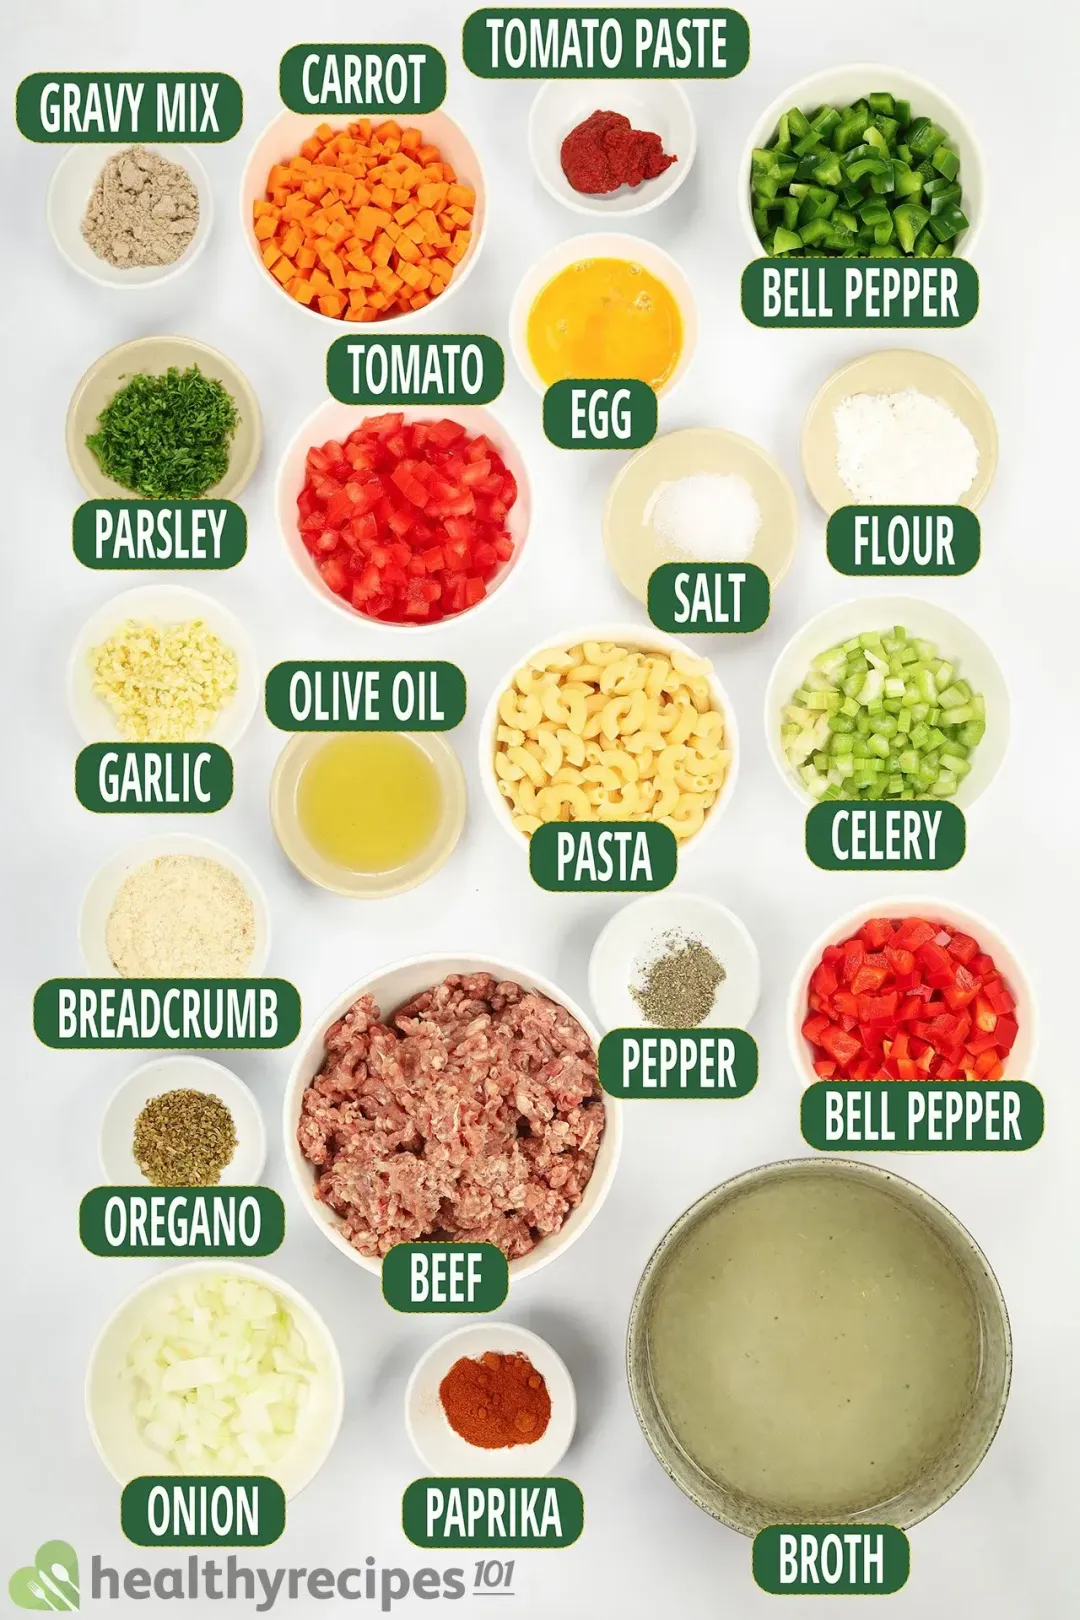 ngredients for Our Meatball Soup Recipe